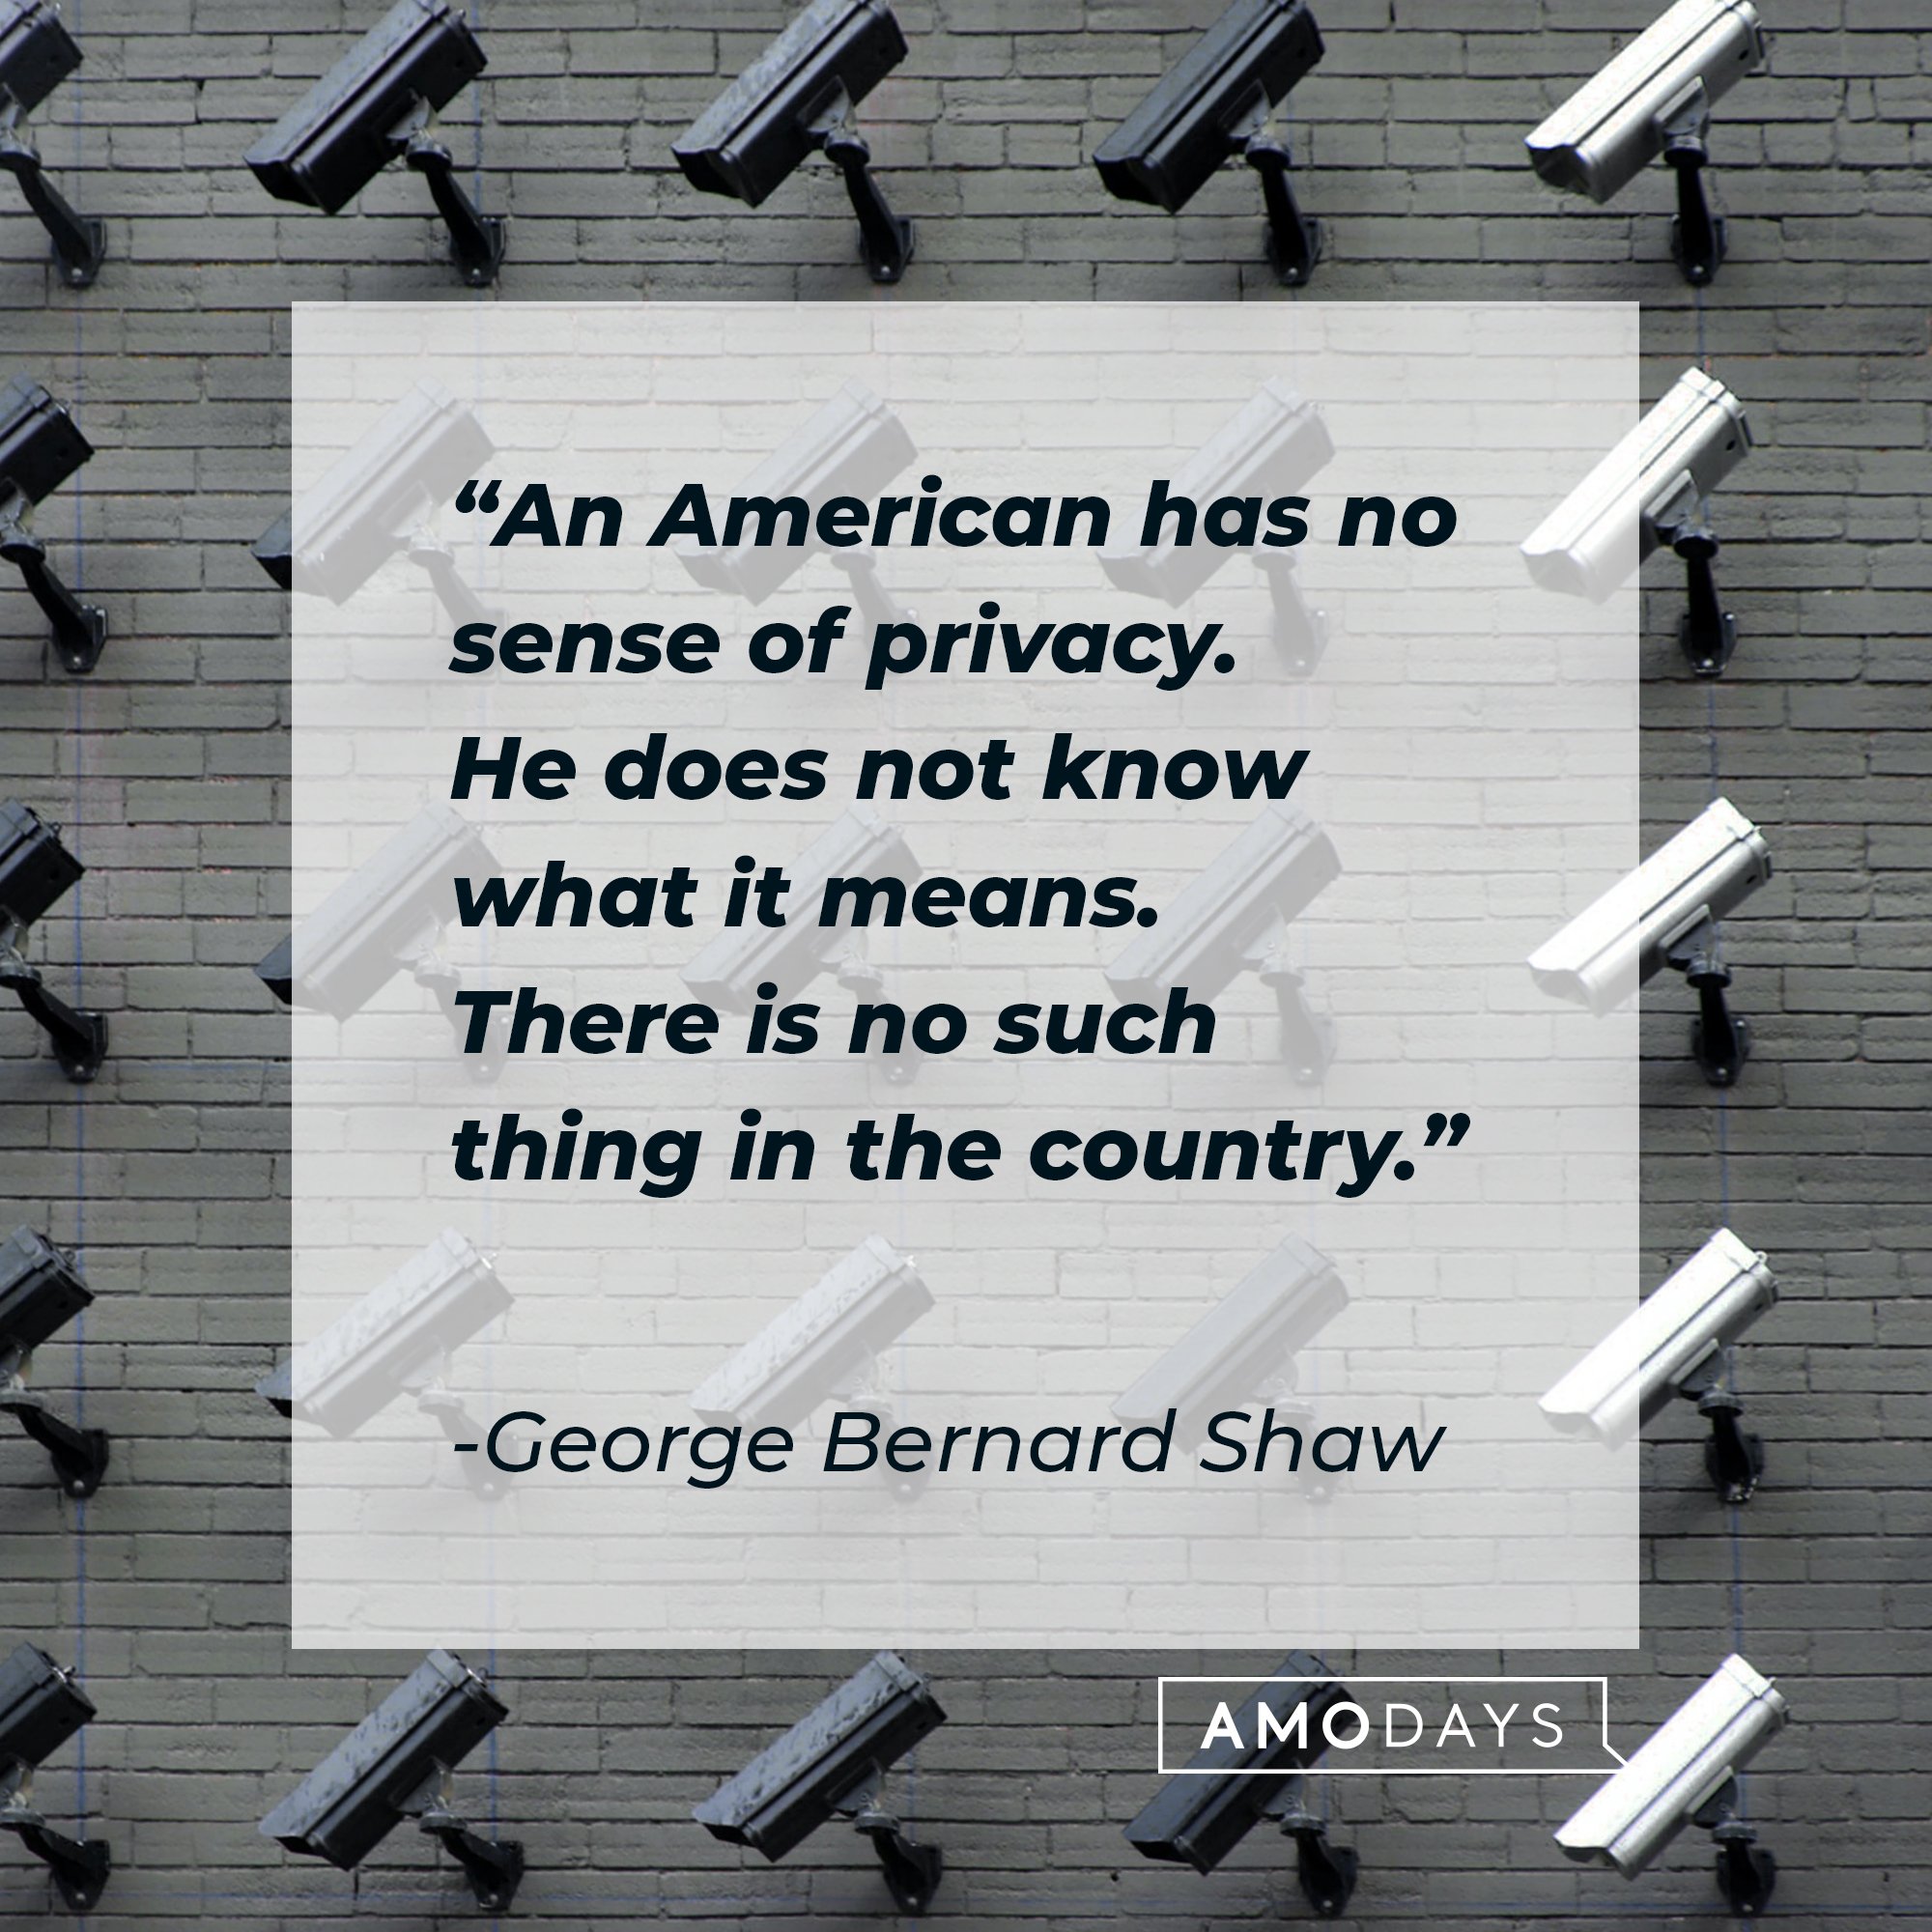 George Bernard Shaw’s quote: "An American has no sense of privacy. He does not know what it means. There is no such thing in the country." | Image: AmoDays